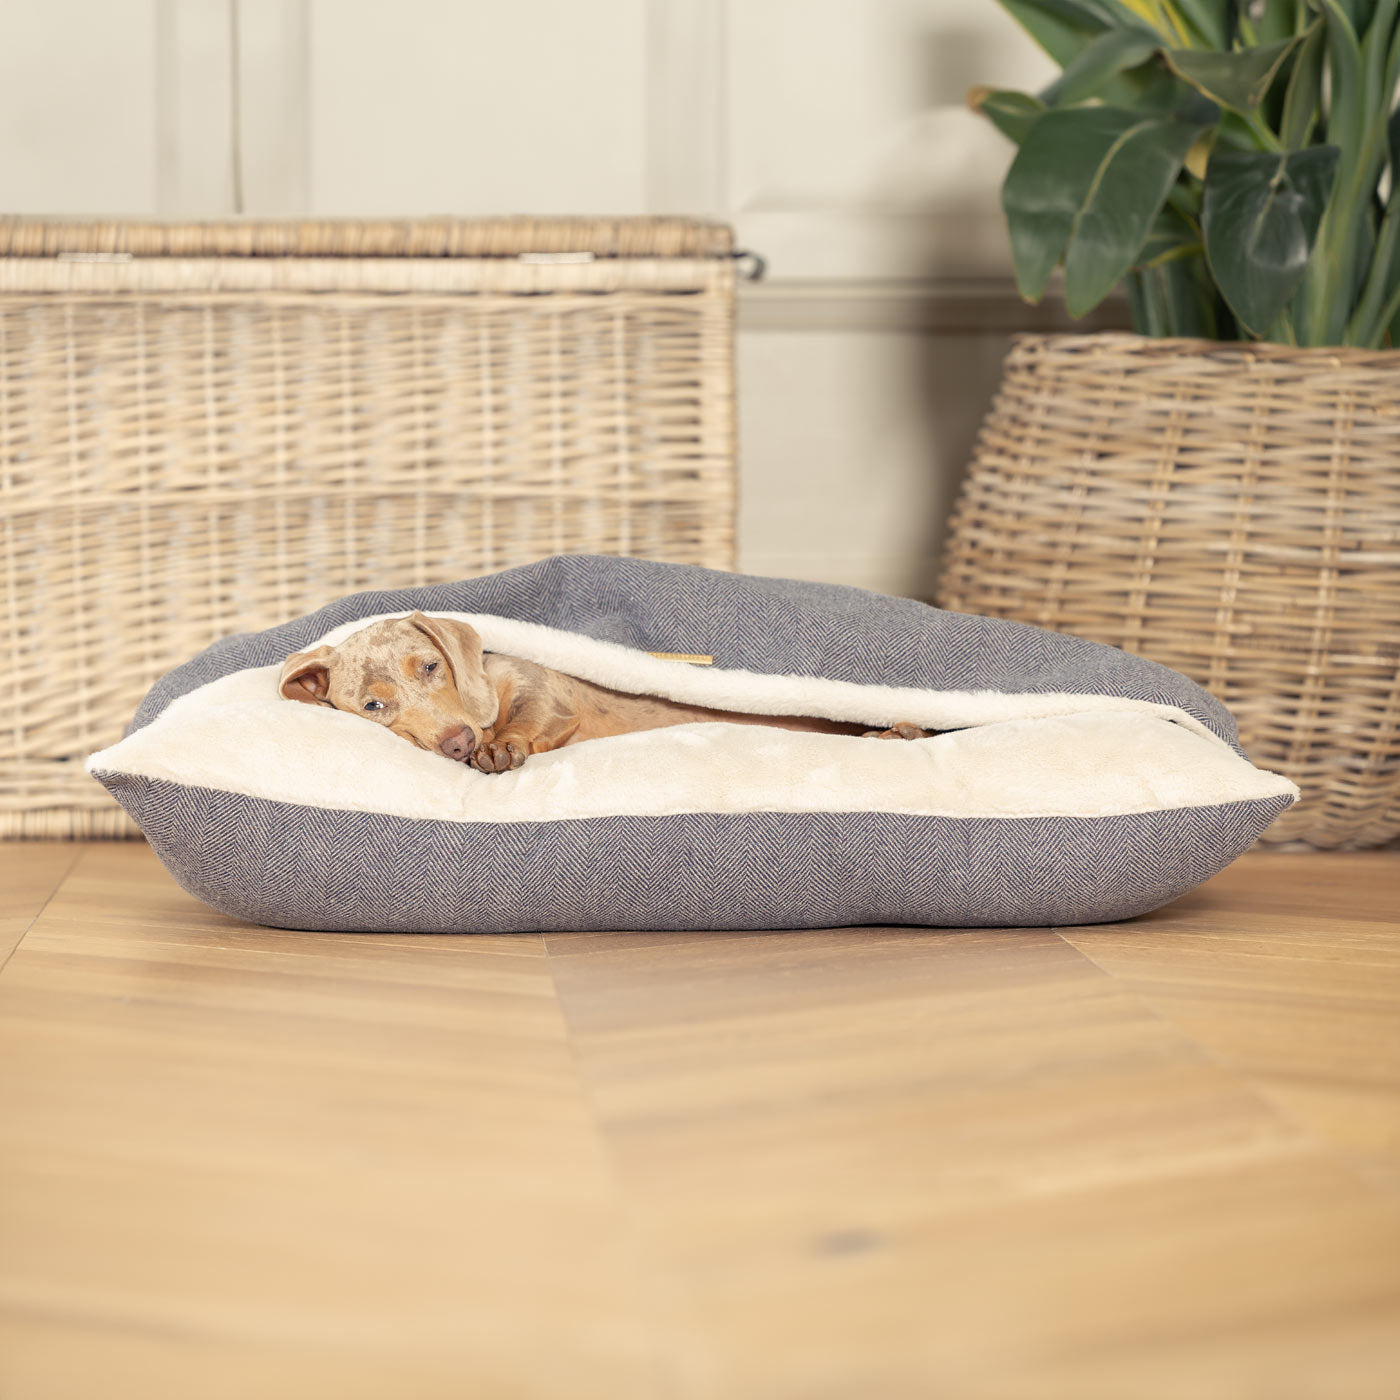 Discover The Perfect Burrow For Your Pet, Our Stunning Sleepy Burrow Dog Beds In Oxford Herringbone Is The Perfect Bed Choice For Your Pet, Available Now at Lords & Labradors